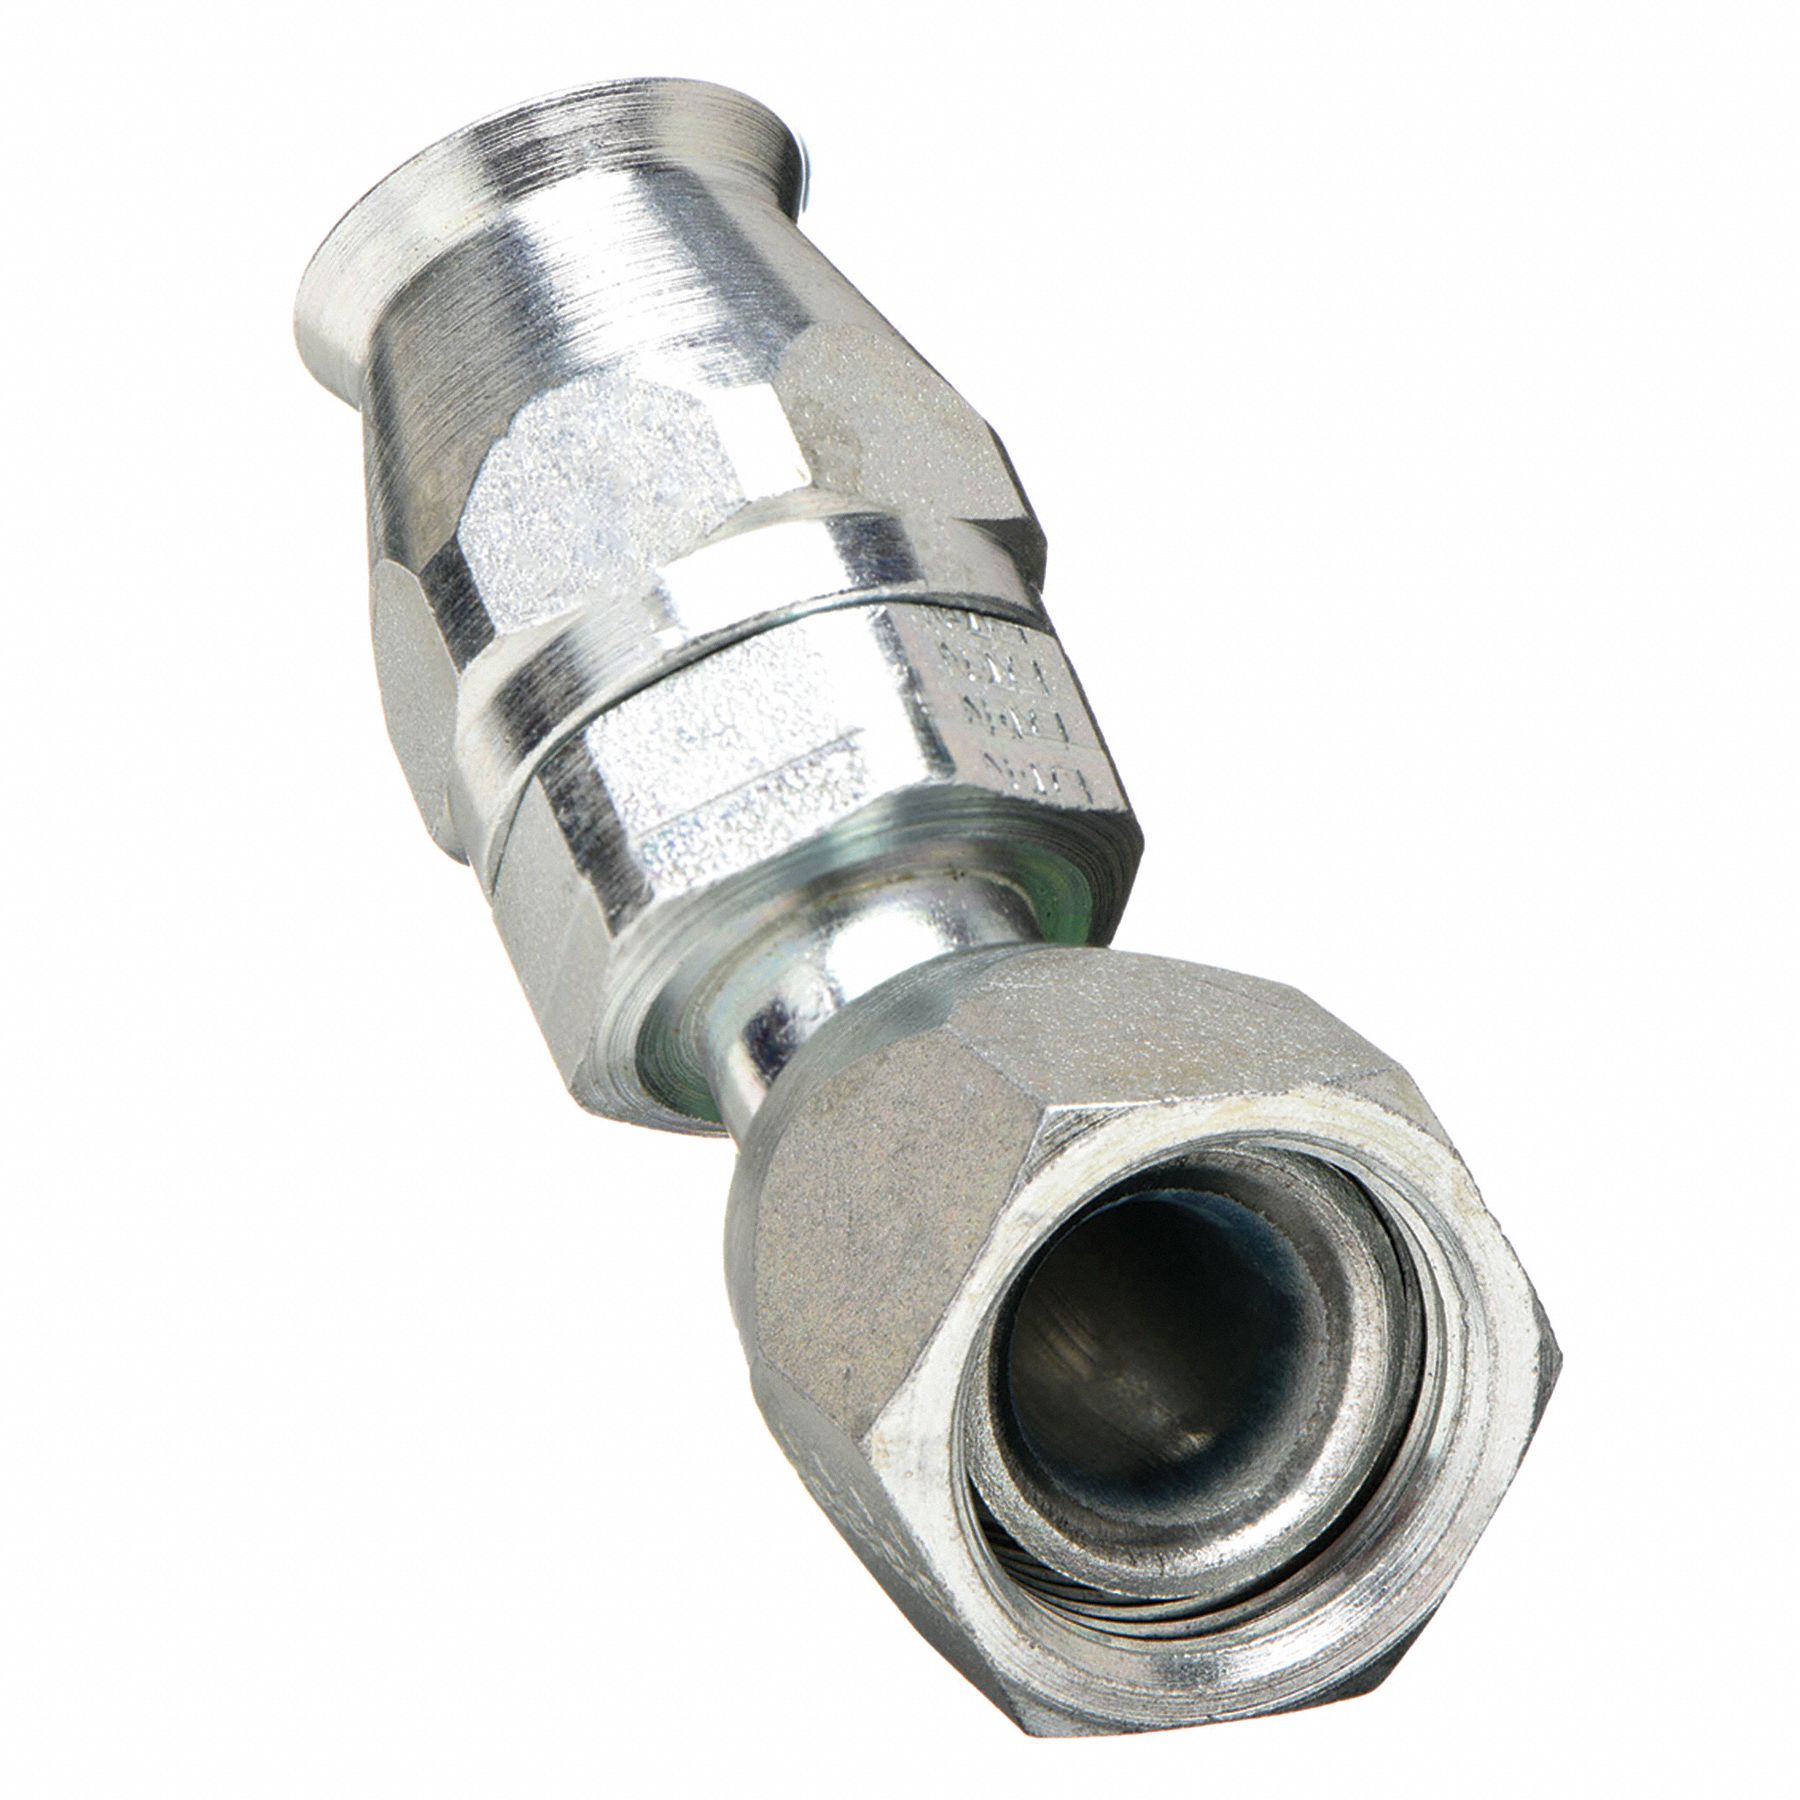 Details about   1502-8-6 Hydraulic FP-FPX 90 Fitting 